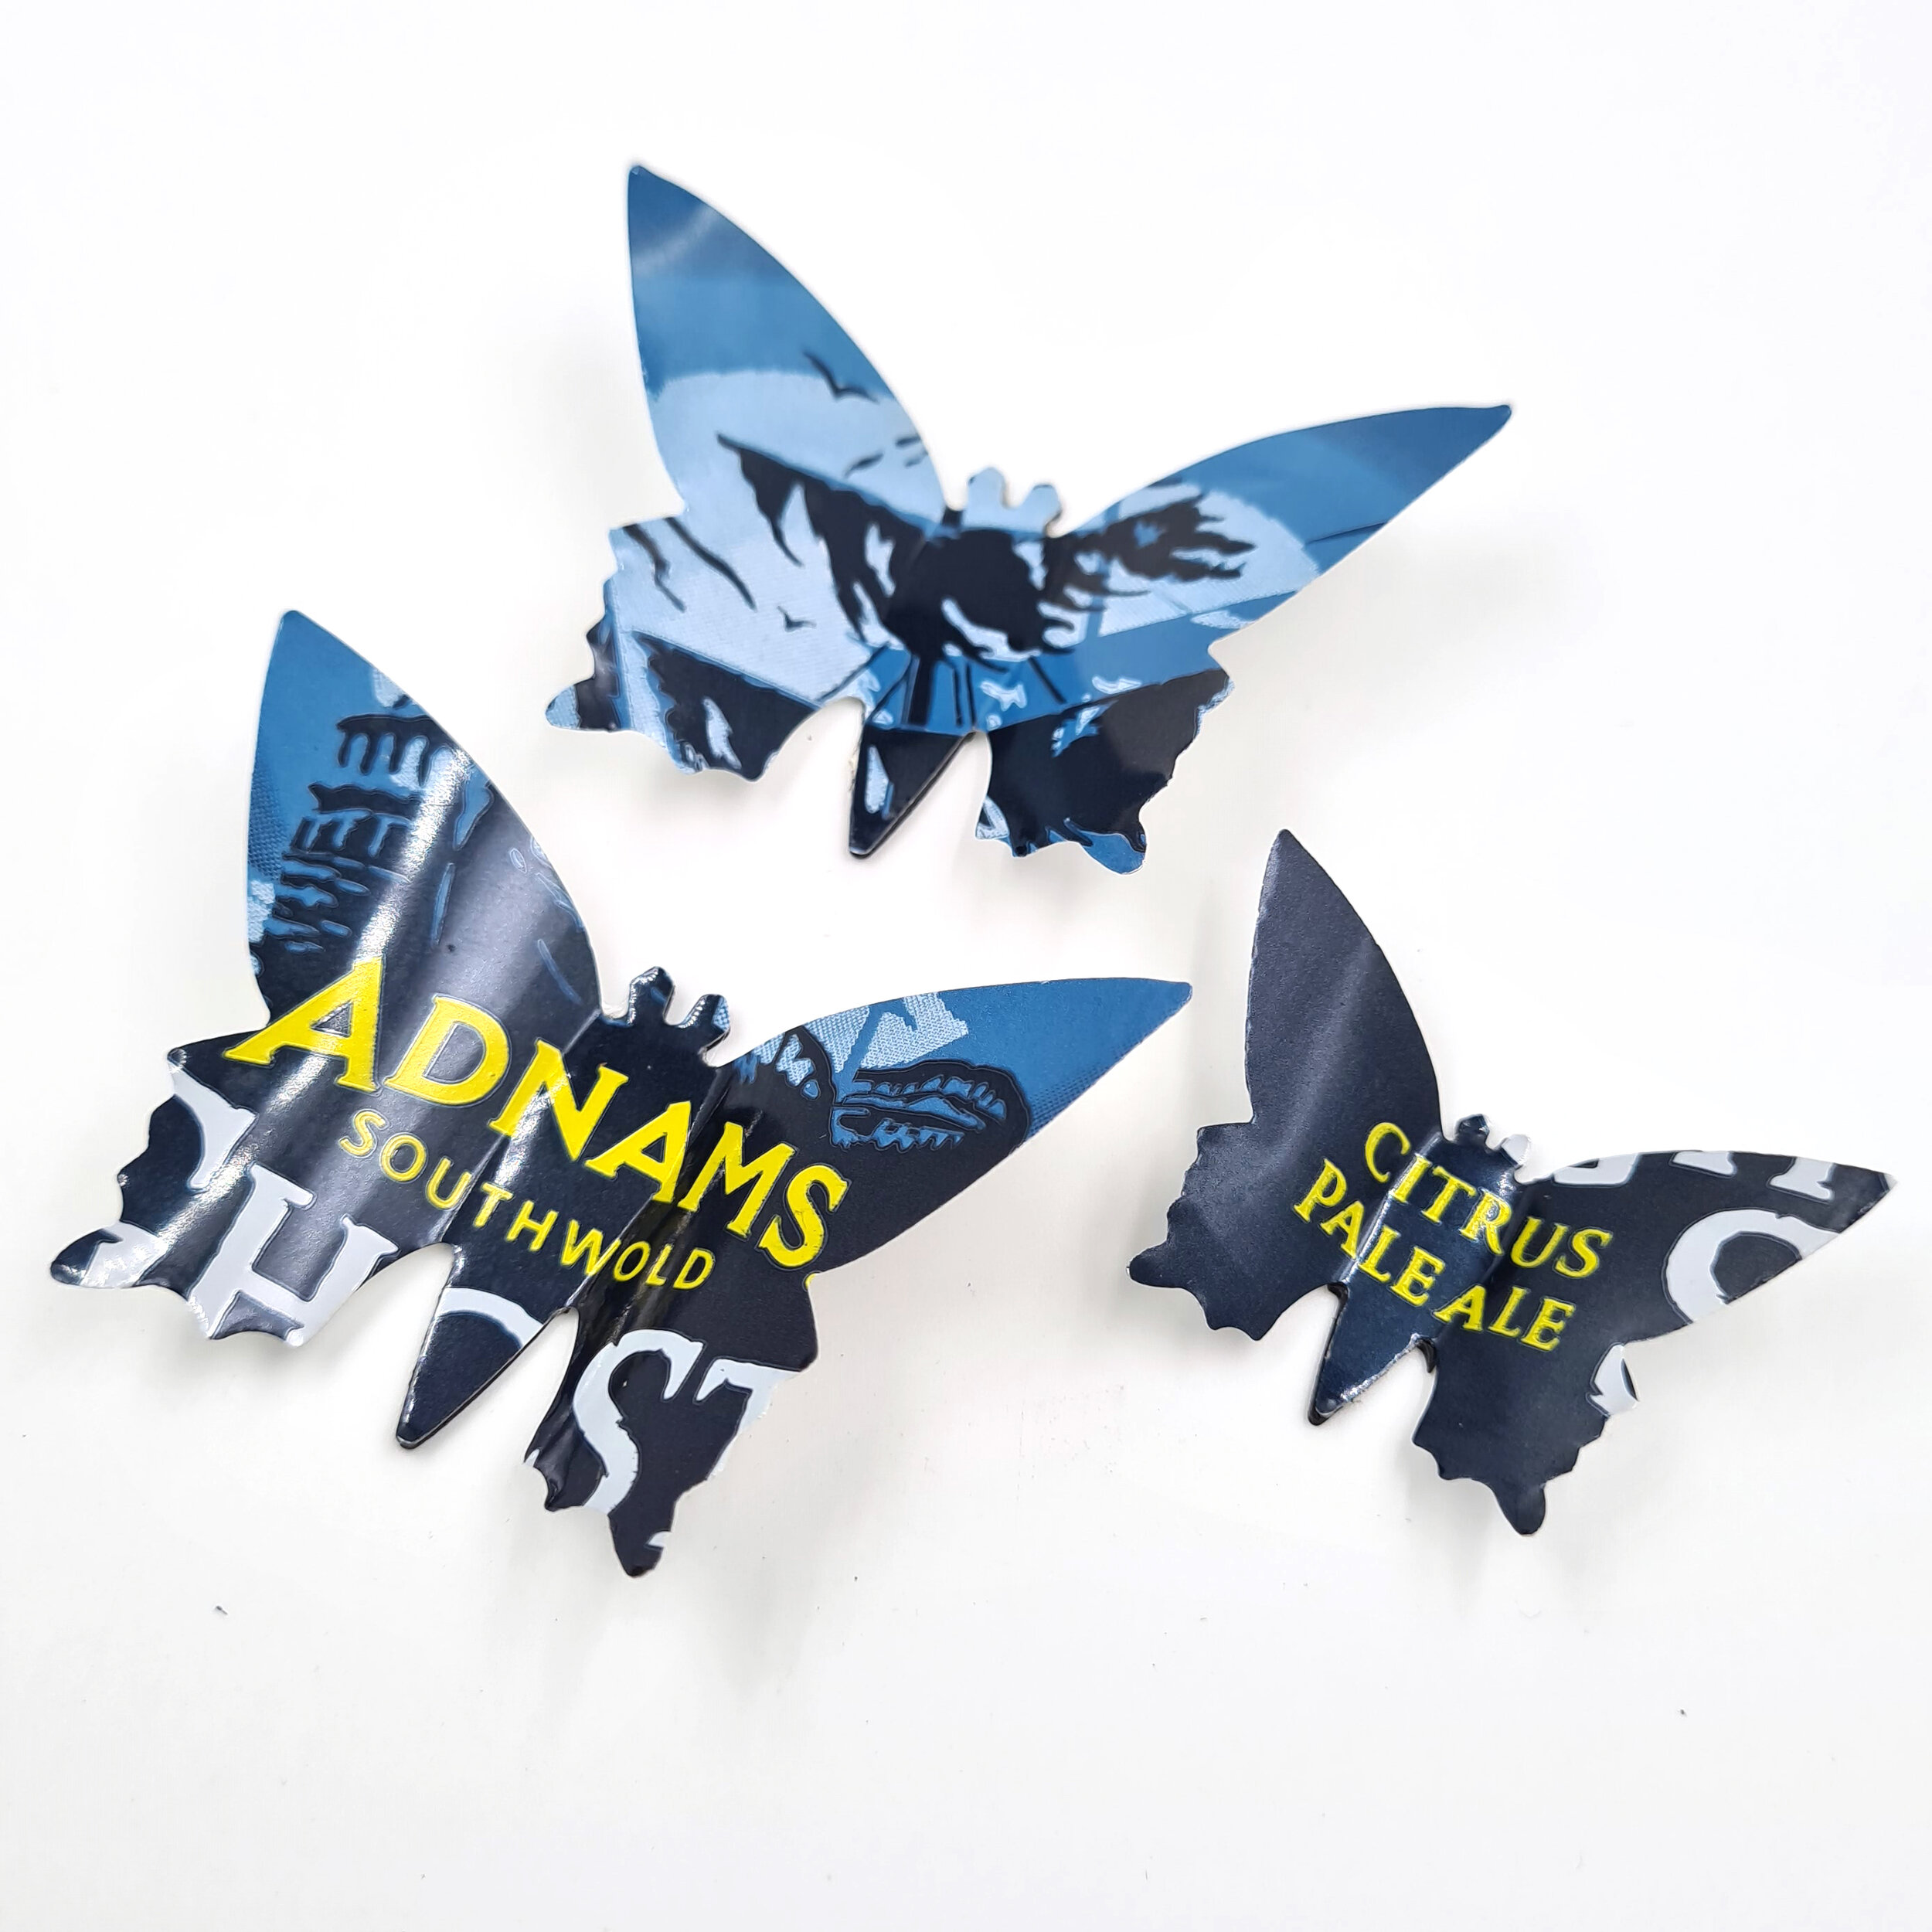 Three Adnams blue and yellow creative Butterfly Can Magnets